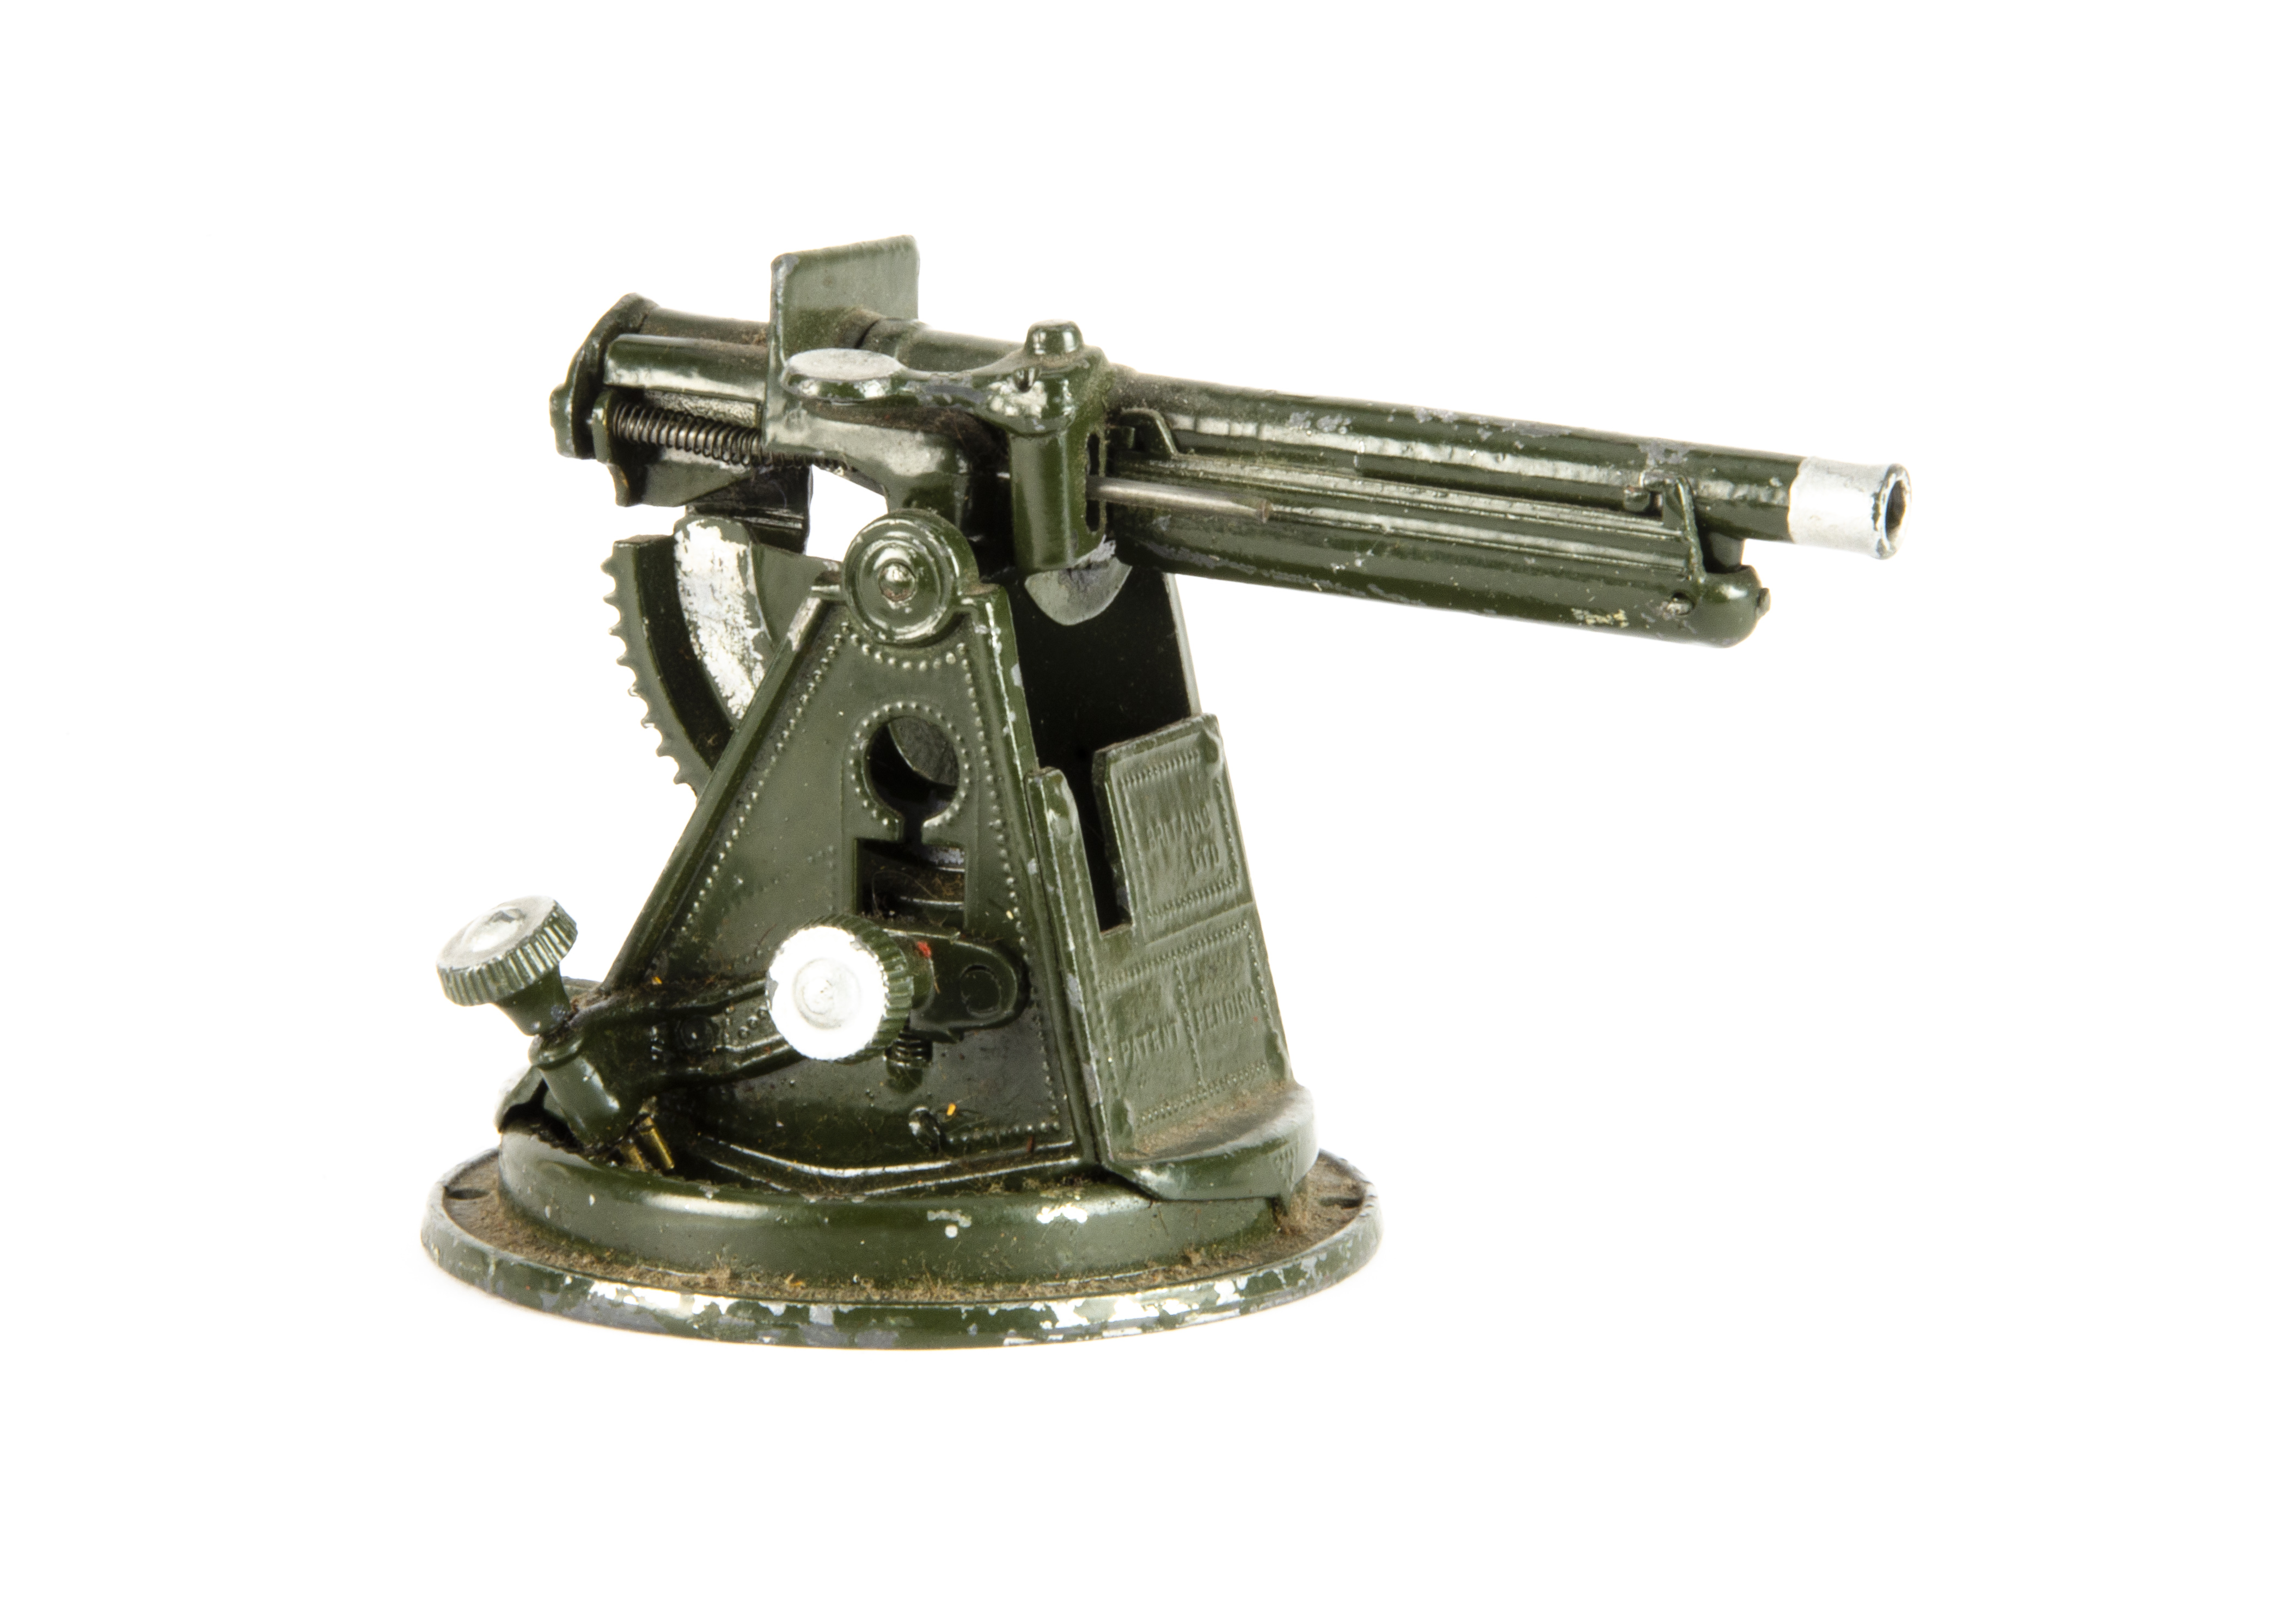 Britains loose 4.5 inch Anti-Aircraft Gun from set 1522, elevation and traverse working, though